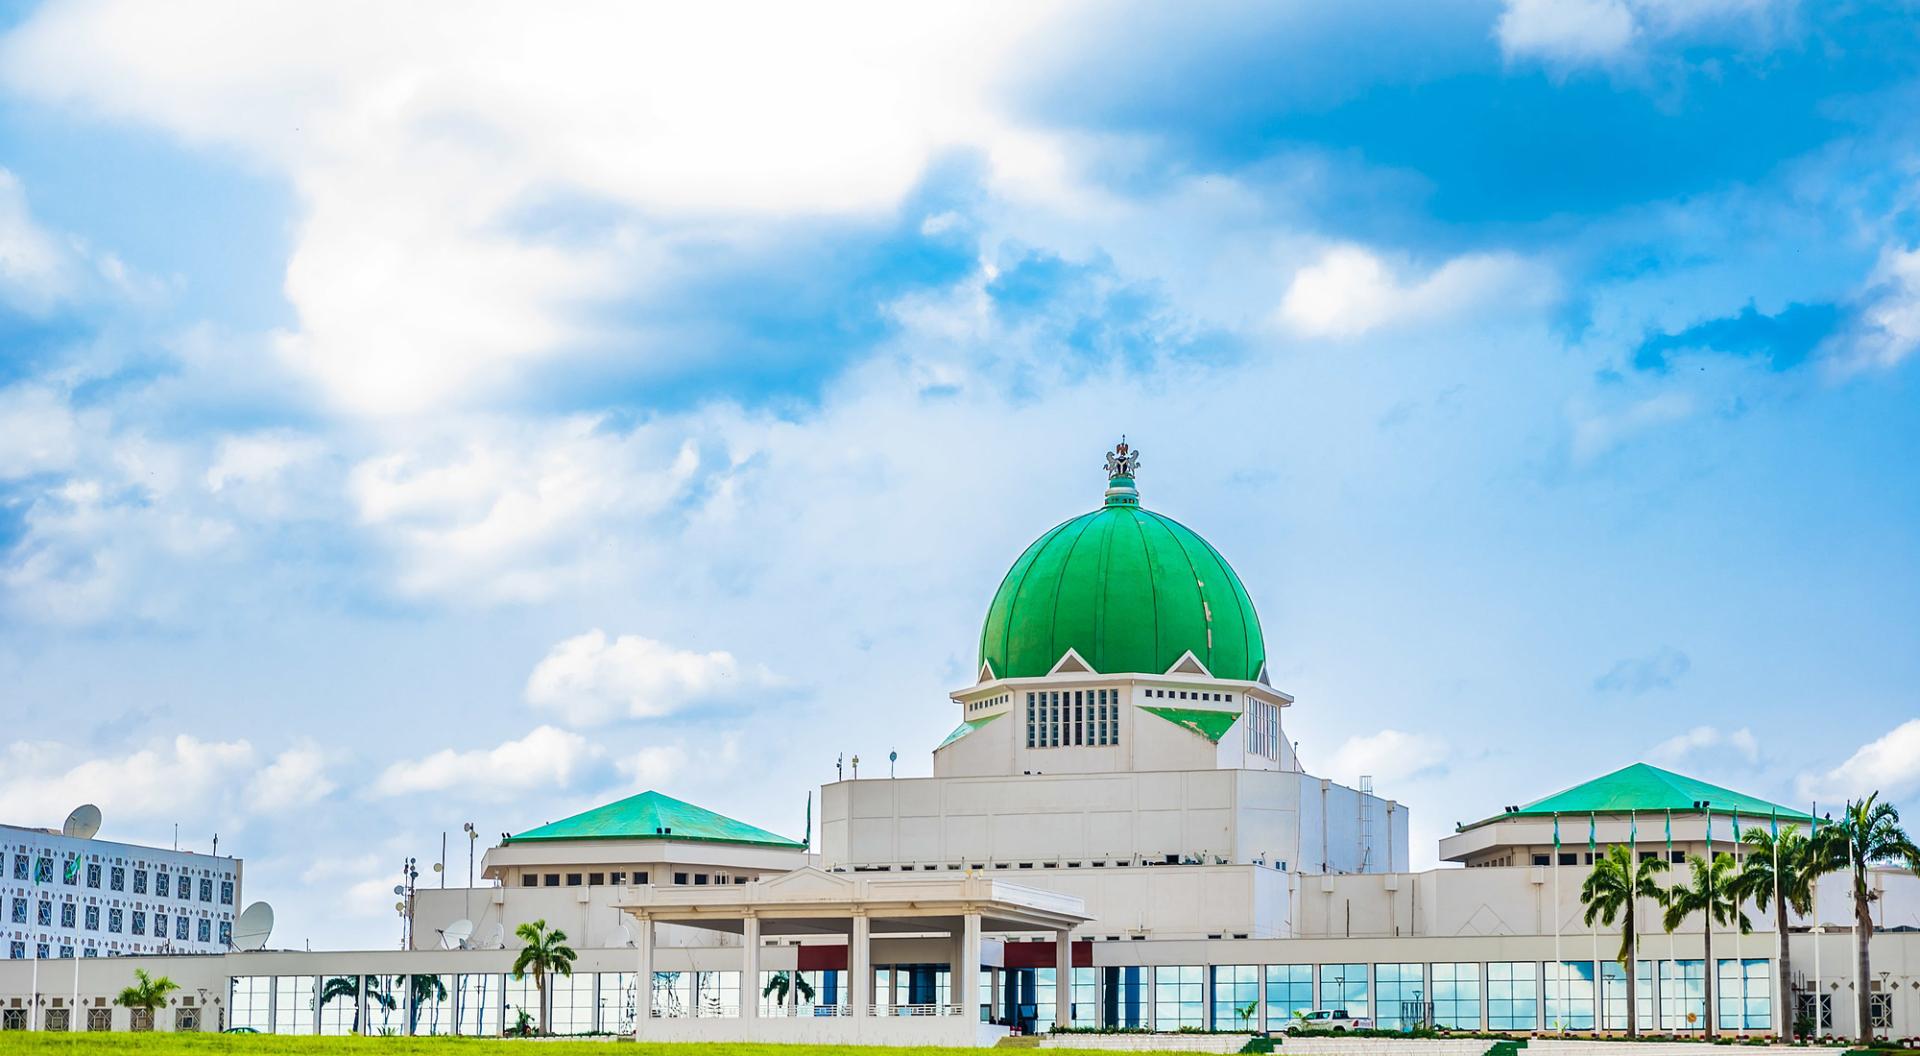 The National Assembly Globe in Nigeria